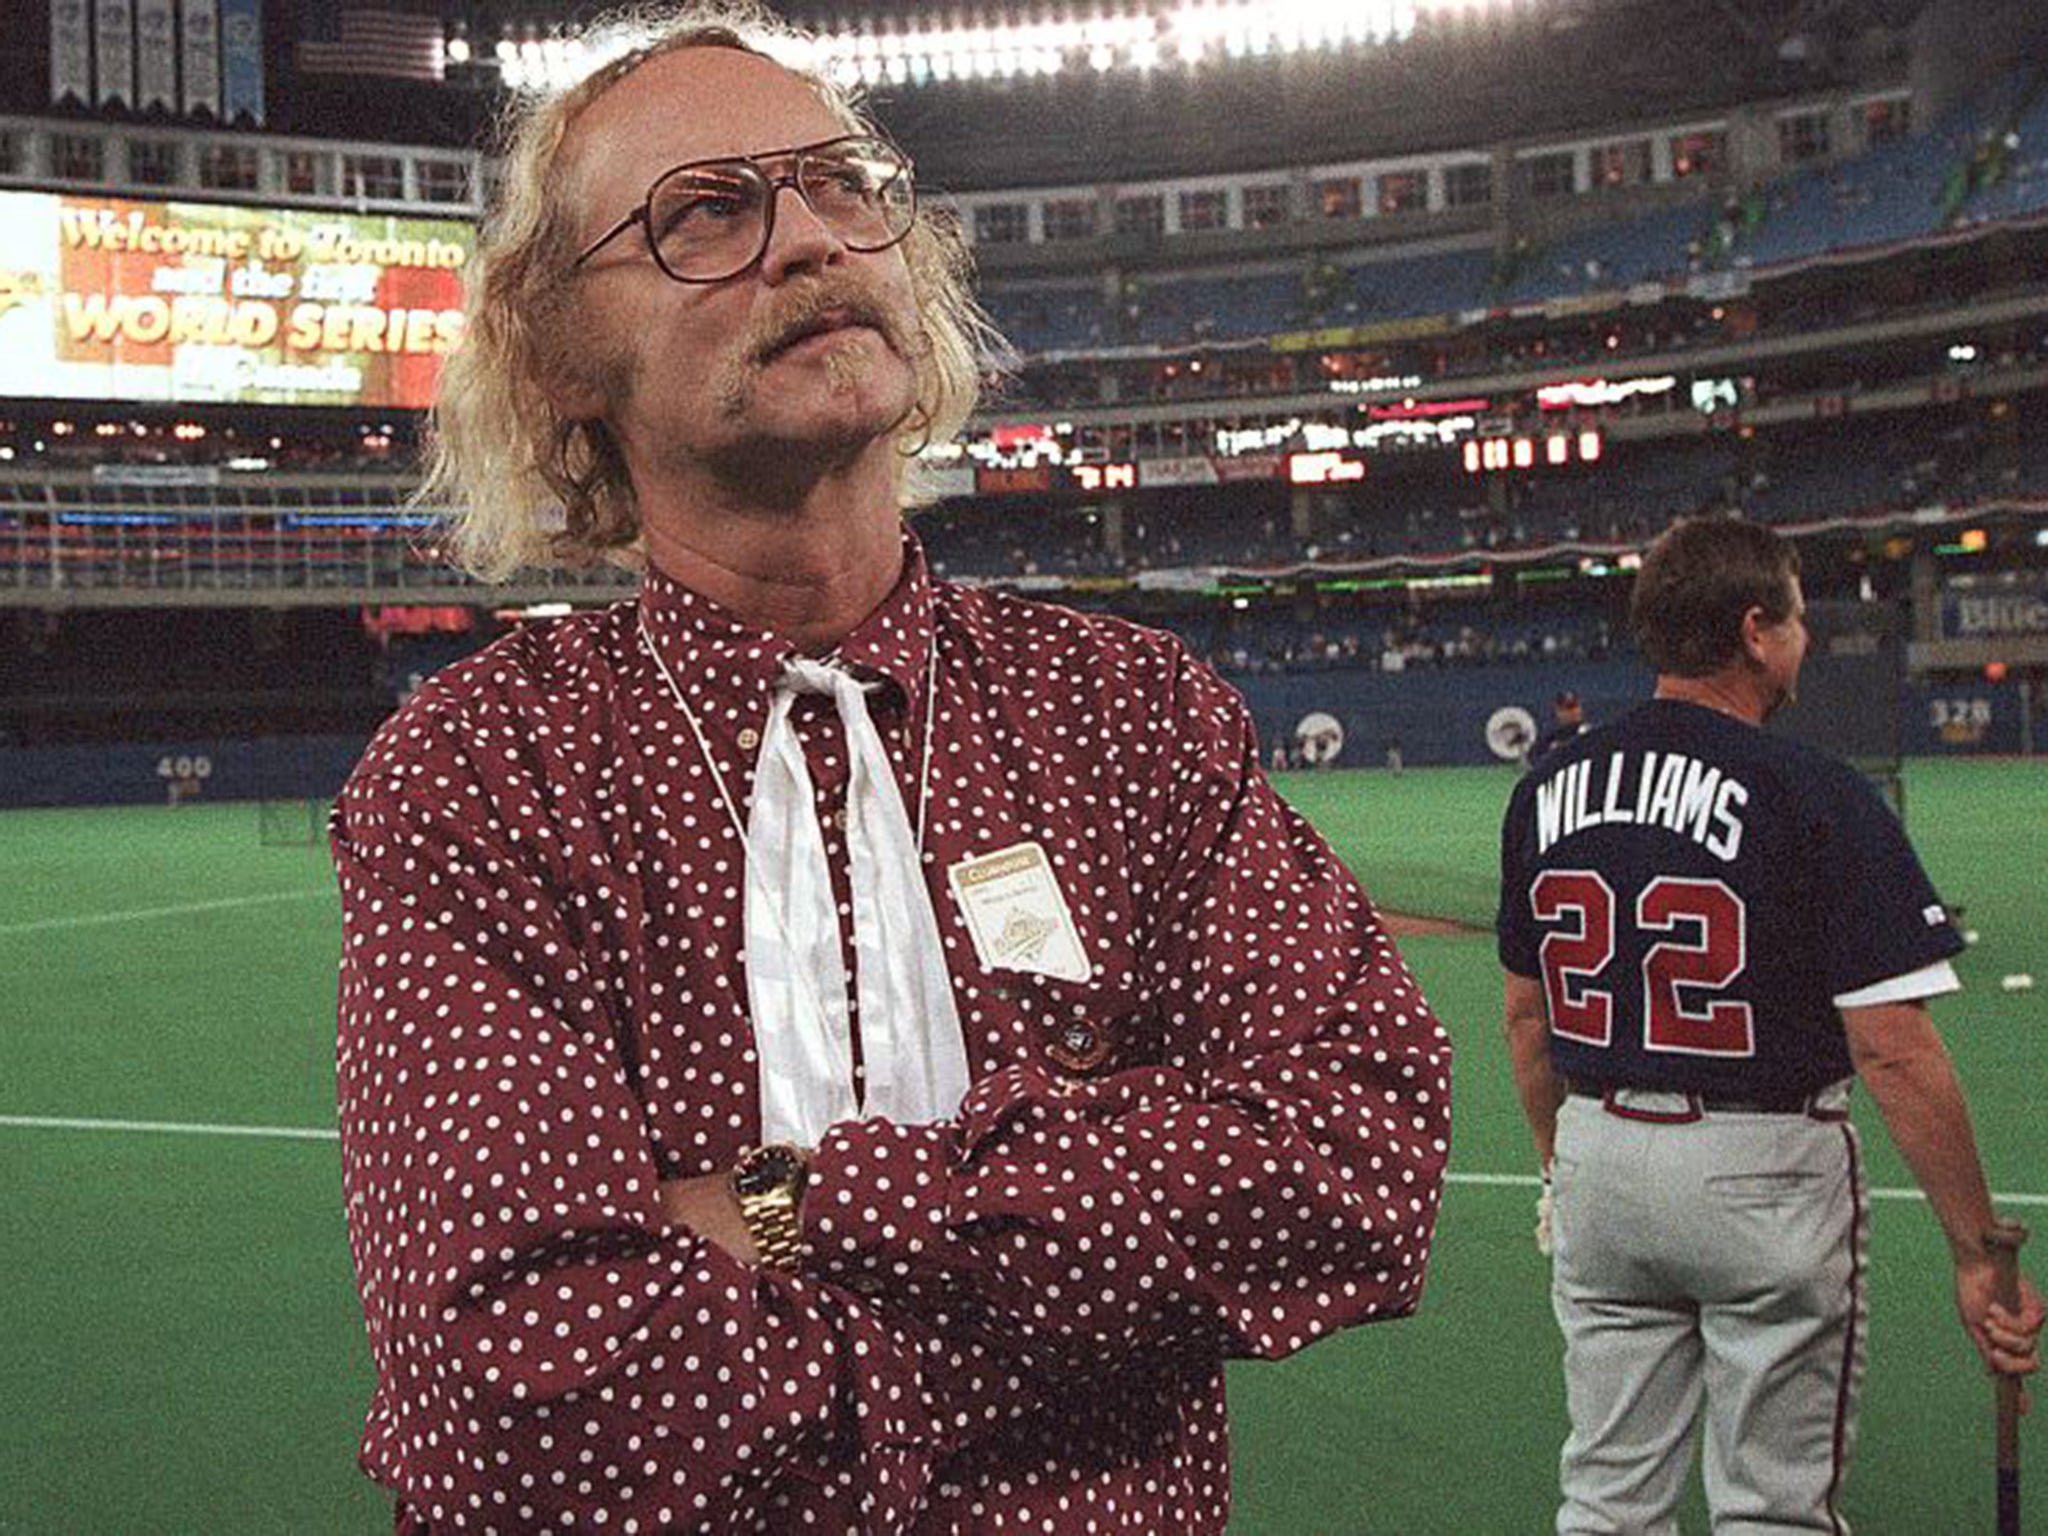 Canadian author W.P. Kinsella standing on the baseball field before game five of the World Series between Toronto Blue Jays and Atlanta Braves in 1992